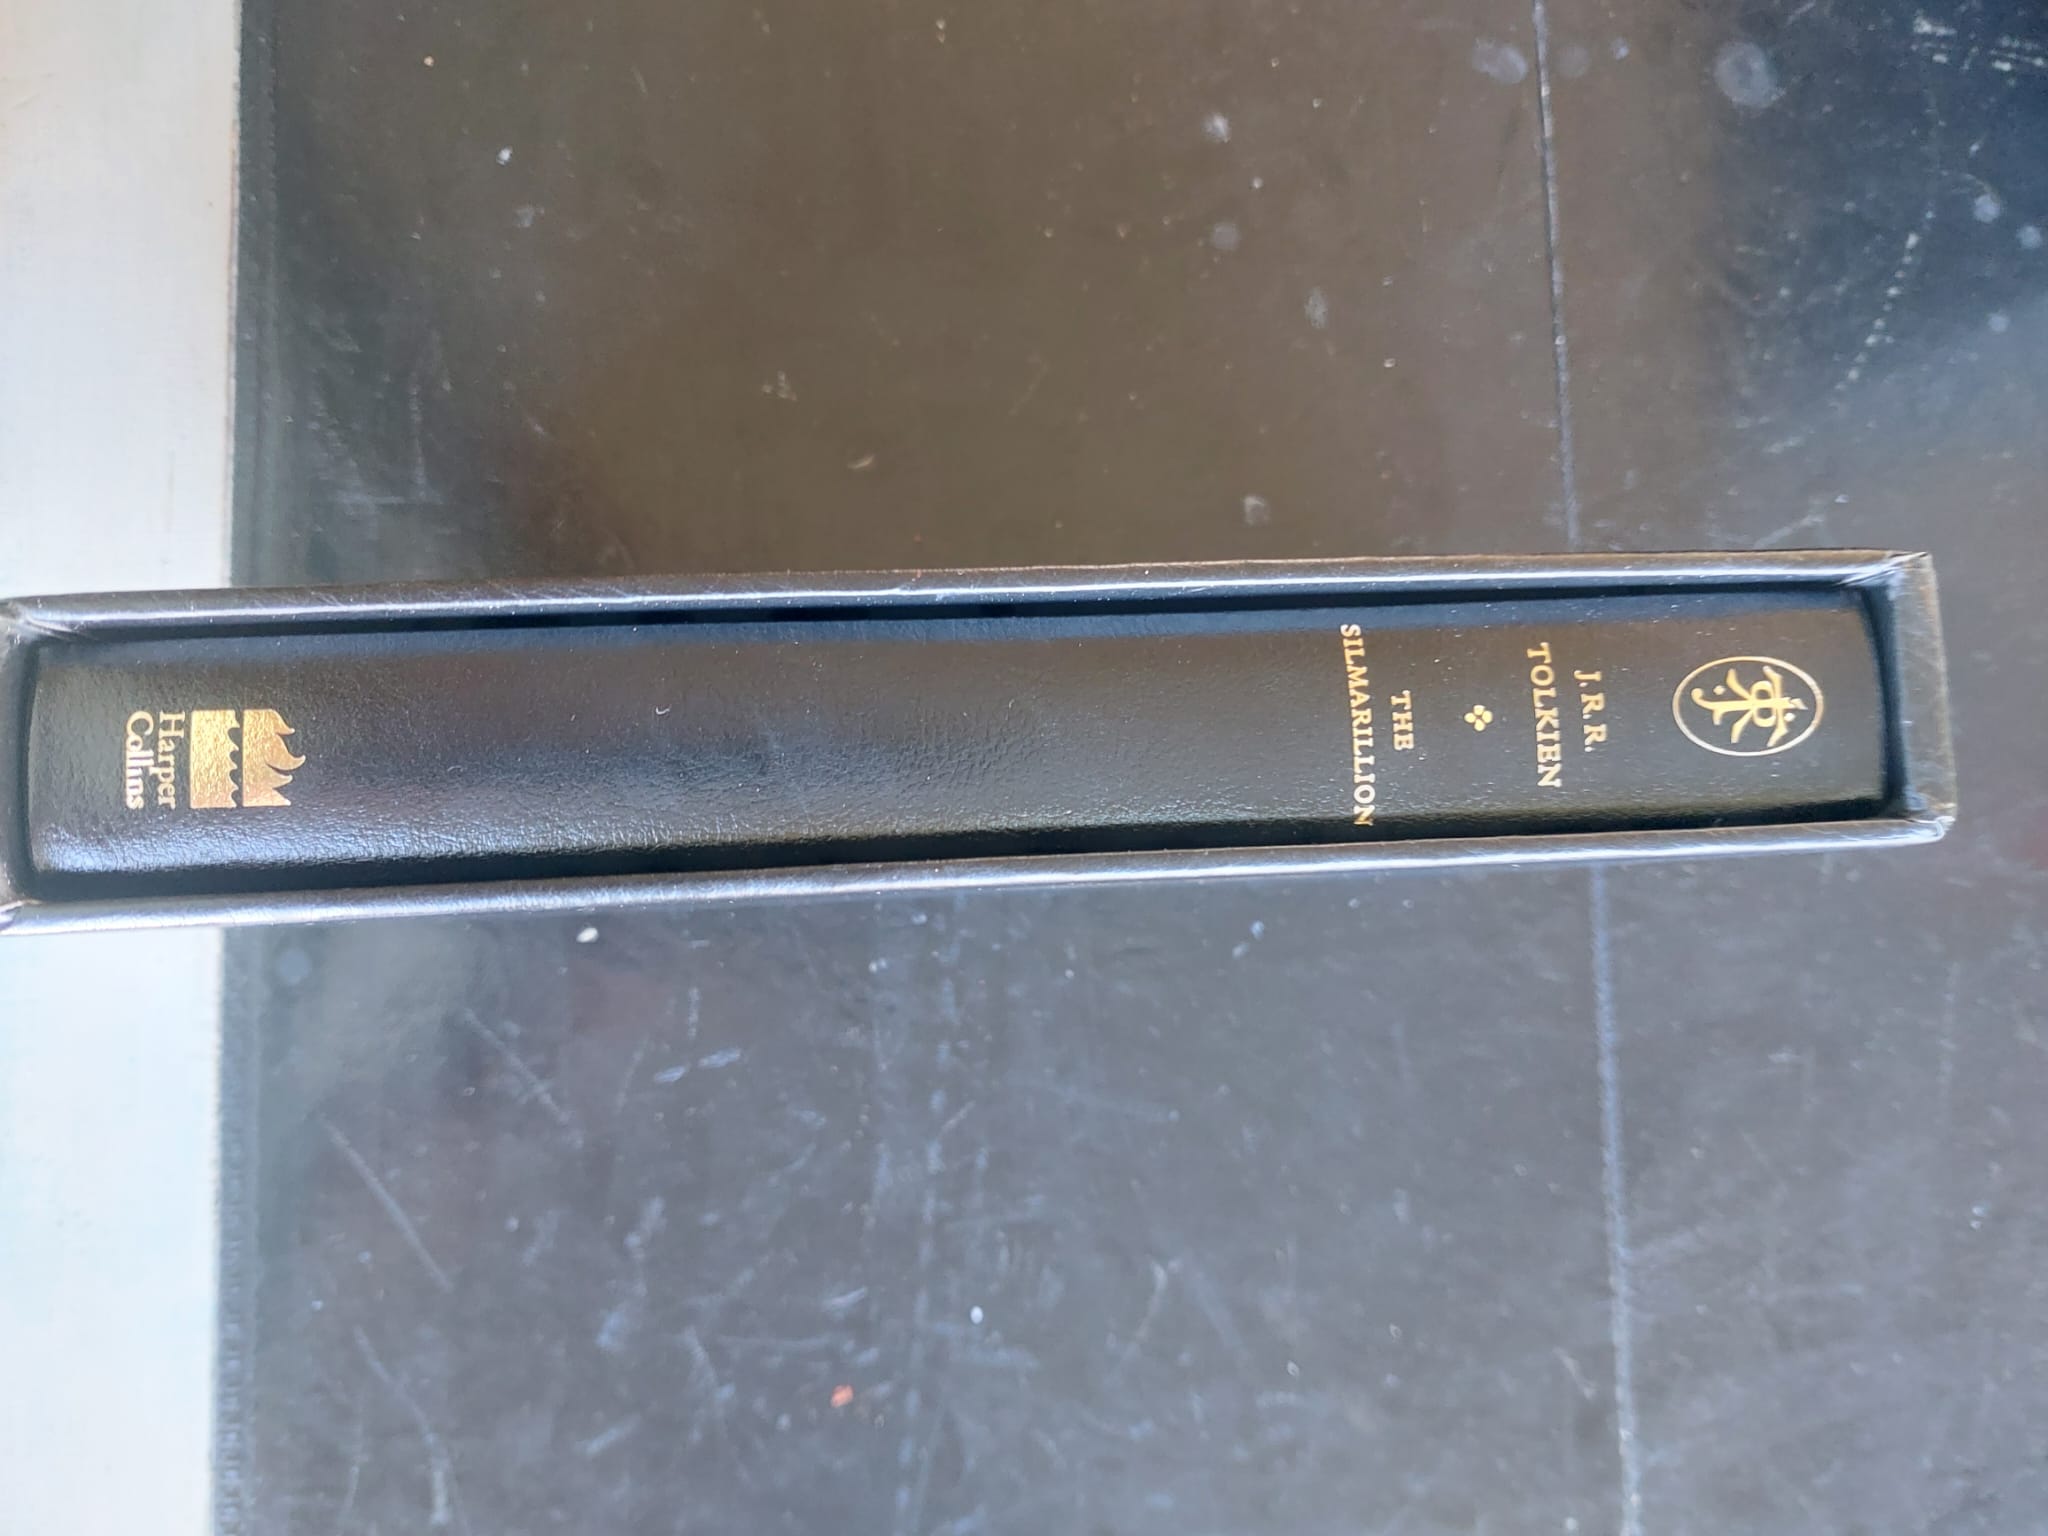 Black Limited De Luxe edition of the Silmarillion 2002